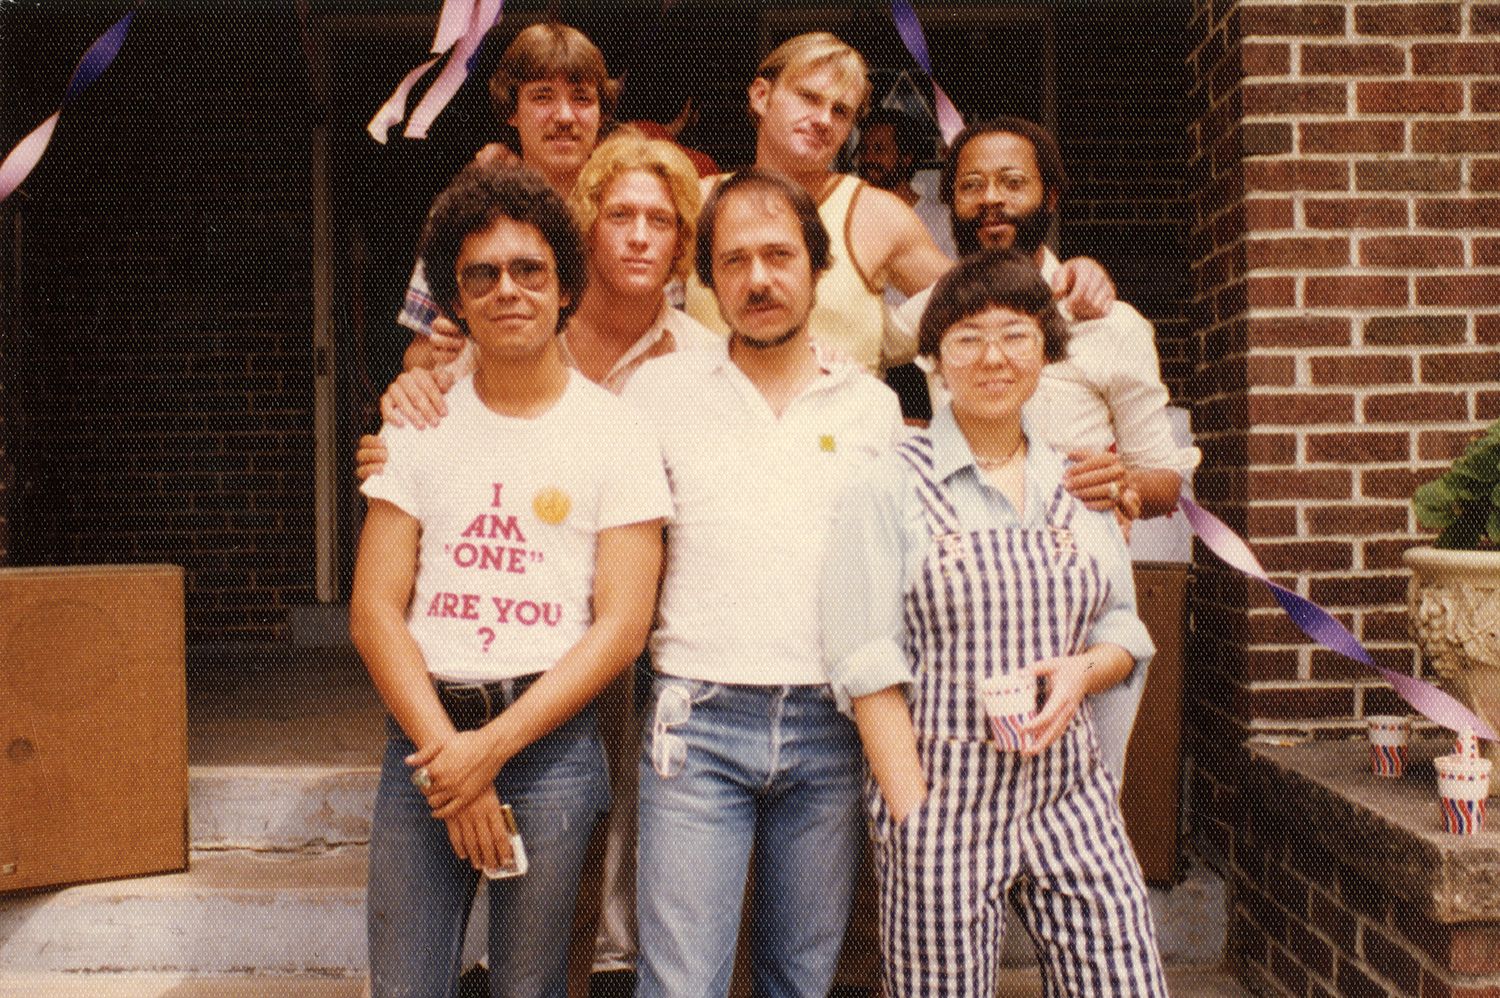 Photo of a group of people standing on the steps of a red brick building. There are streamers hanging from something behind them. The seven people are standing closely together, looking at the camera. One person in the front wears a white short-sleeved t-shirt that says "I AM 'ONE' - ARE YOU?" 